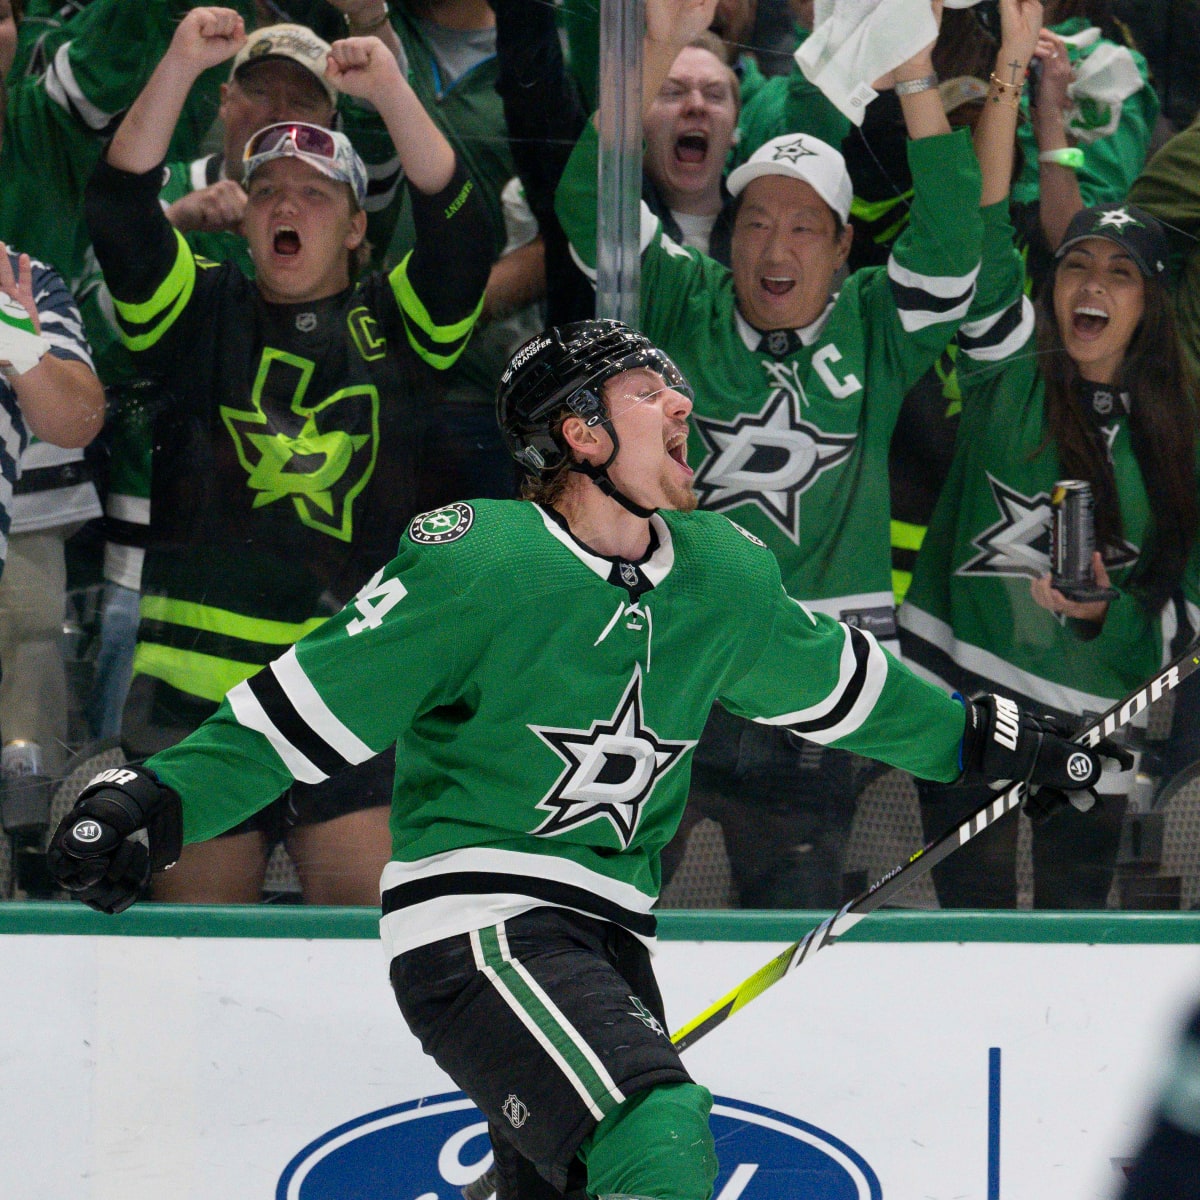 Trip to Western Conference Final on the line as Stars, Kraken face